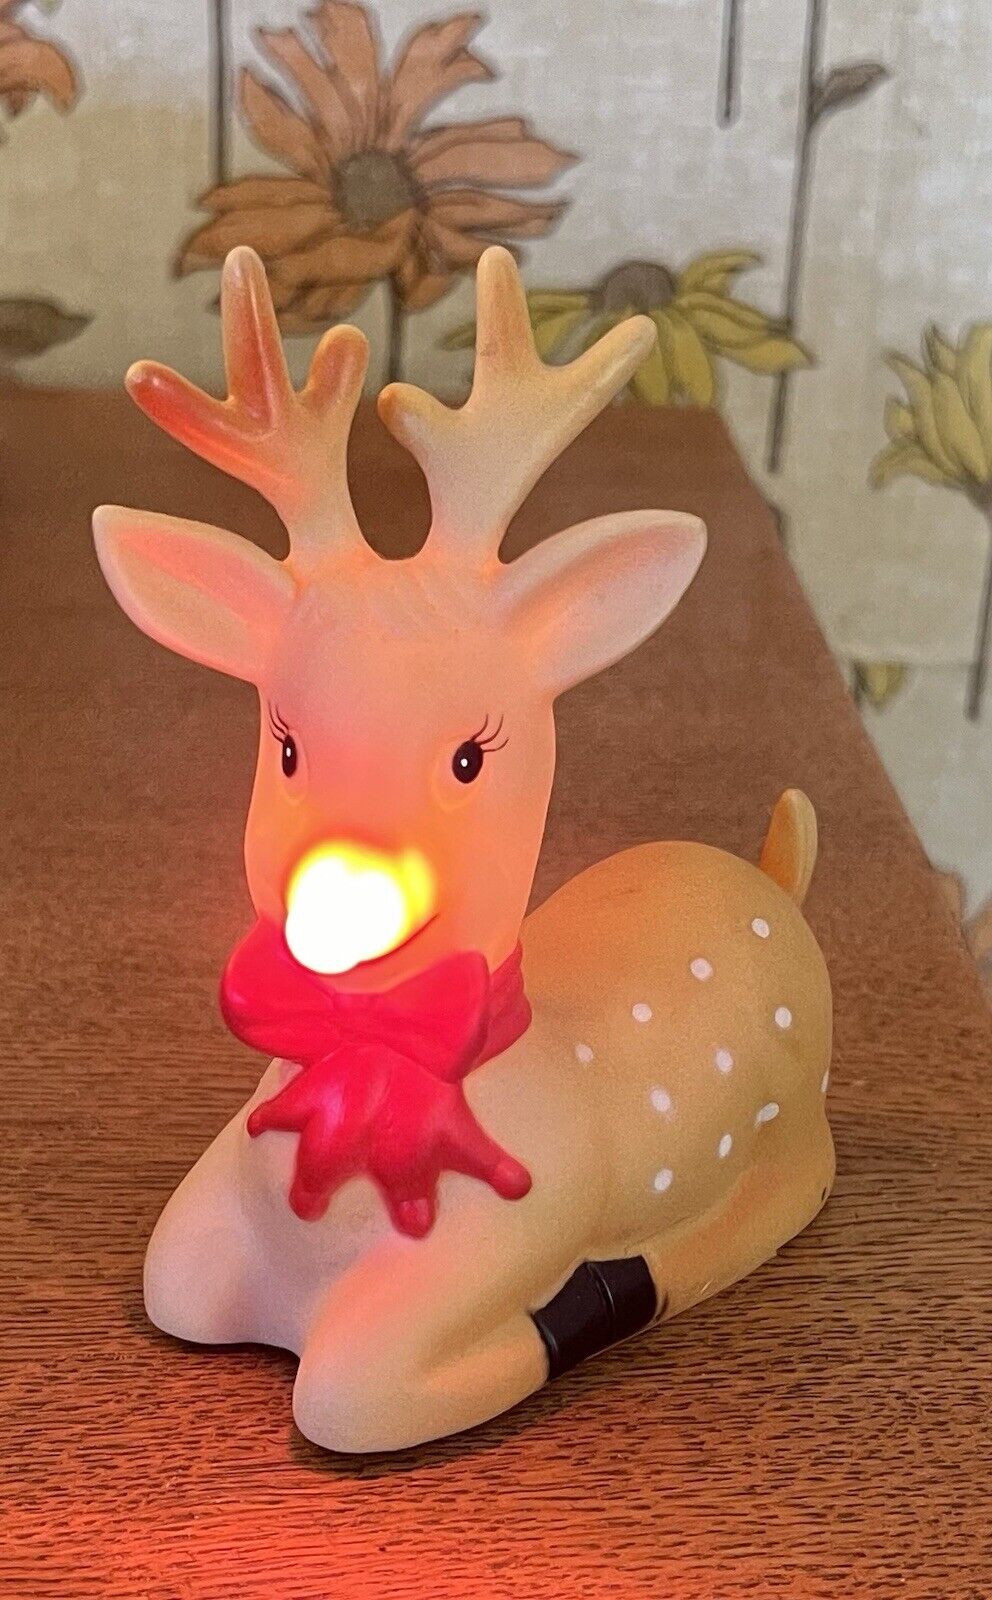 Vintage Rudolph Red Nose Reindeer Blinking Works Kitschy Christmas 